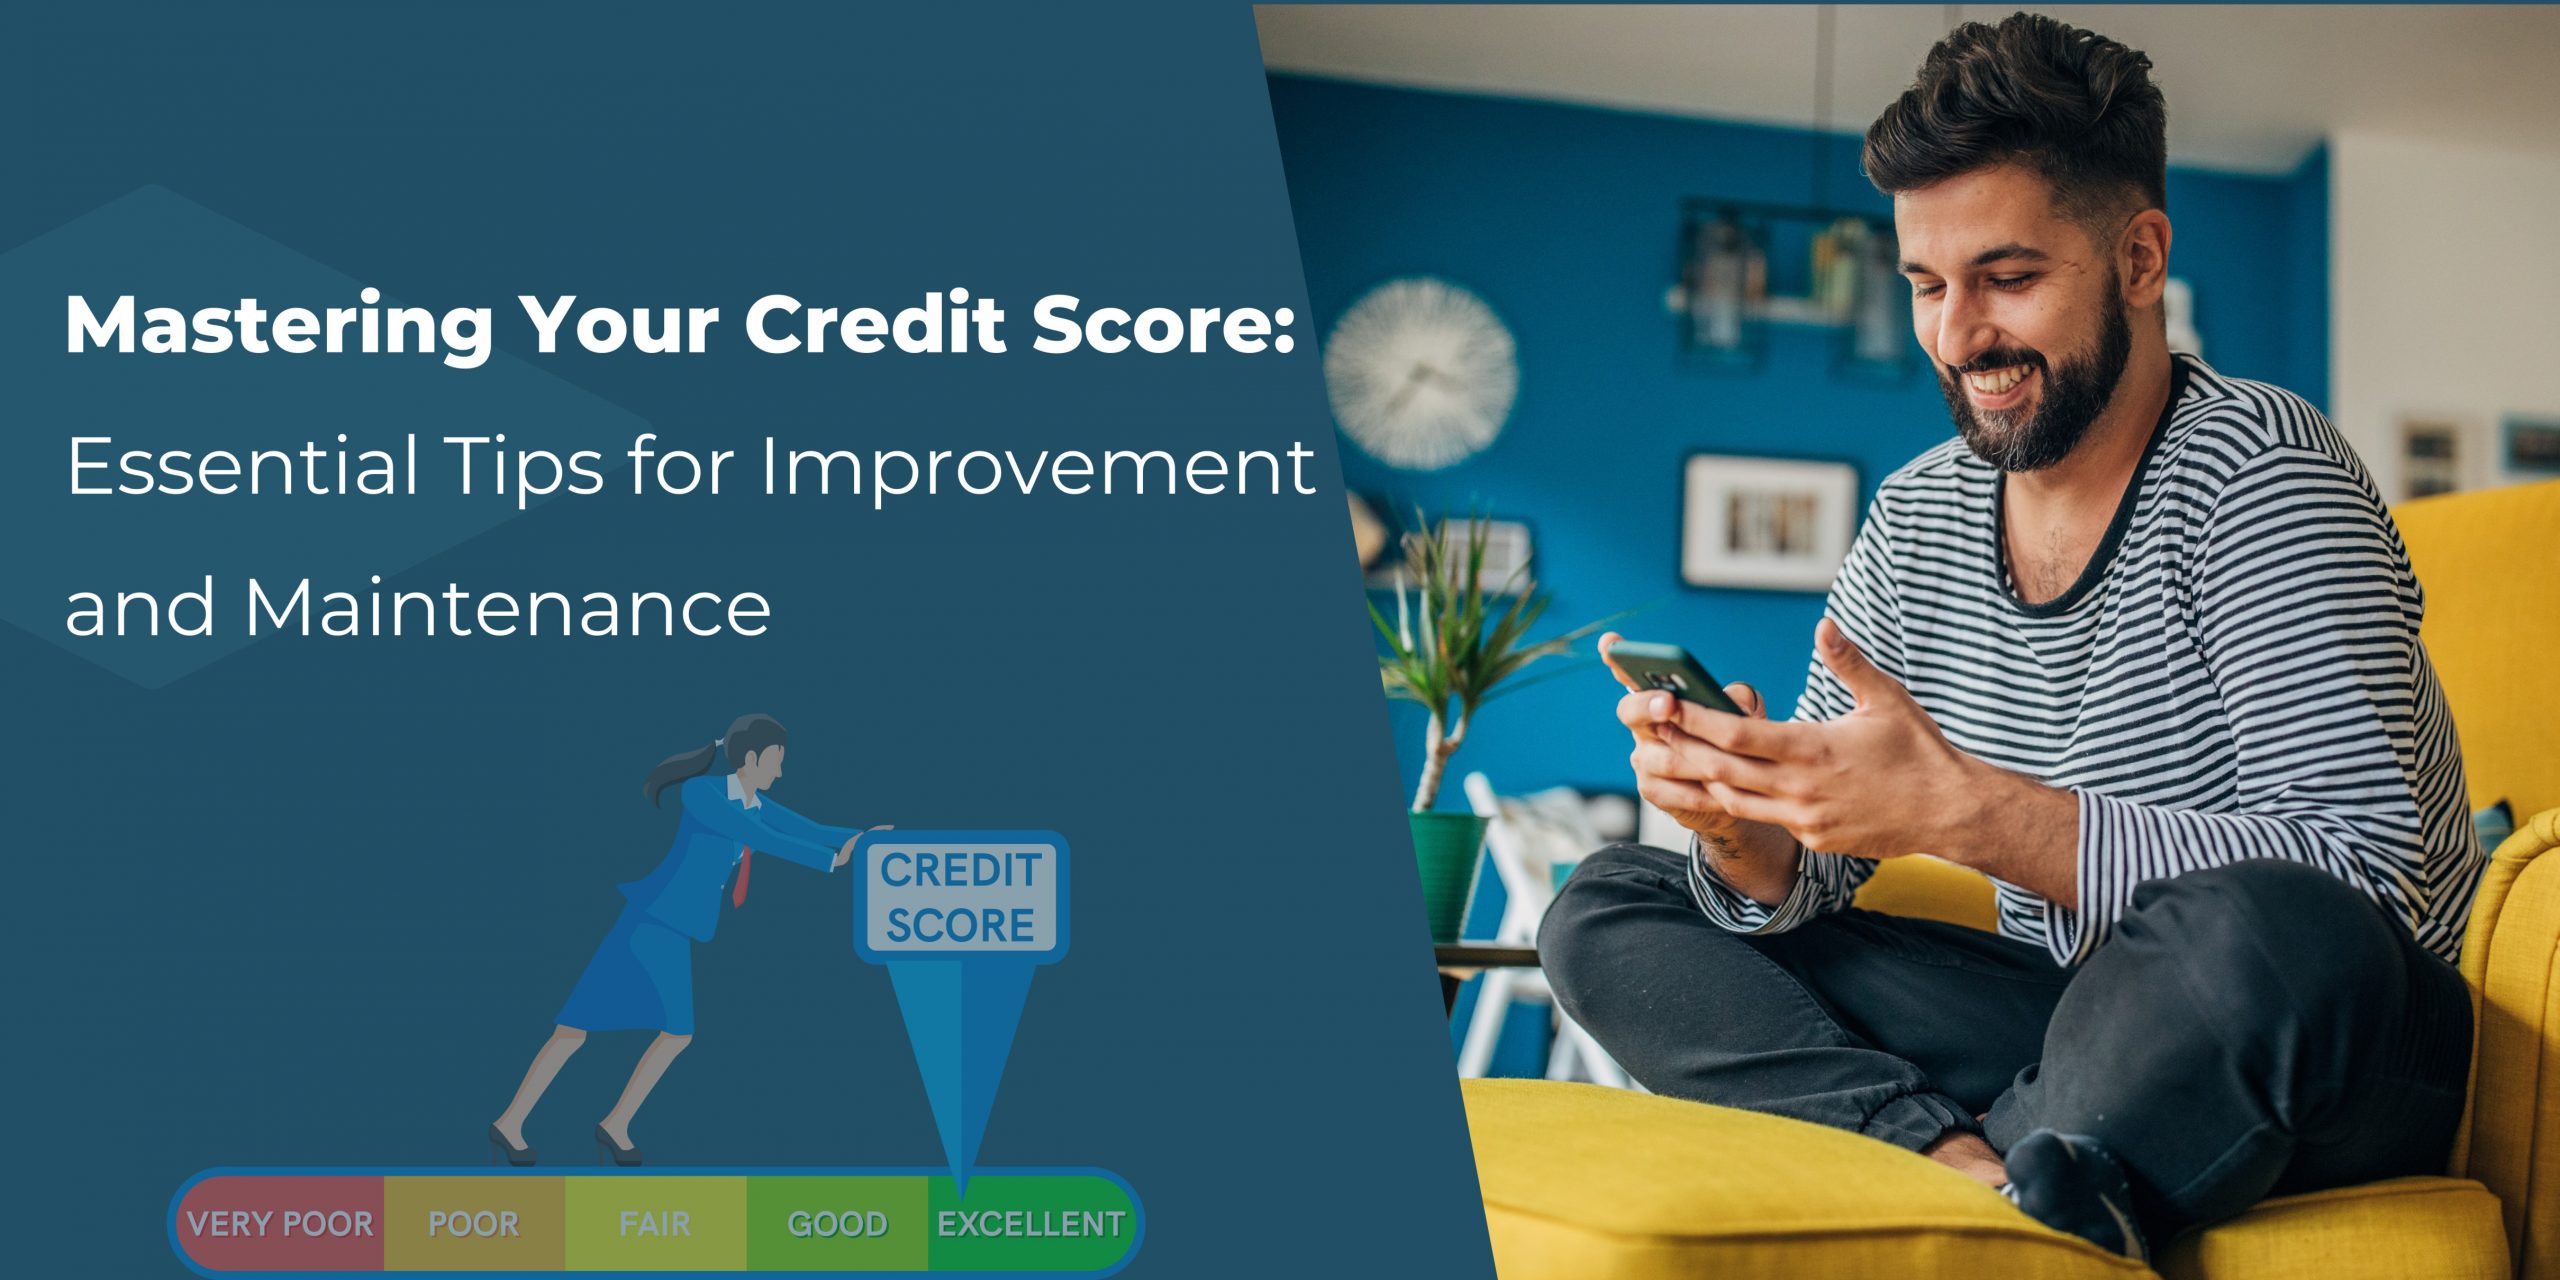 Mastering Your Credit Score: Essential Tips for Improvement and Maintenance